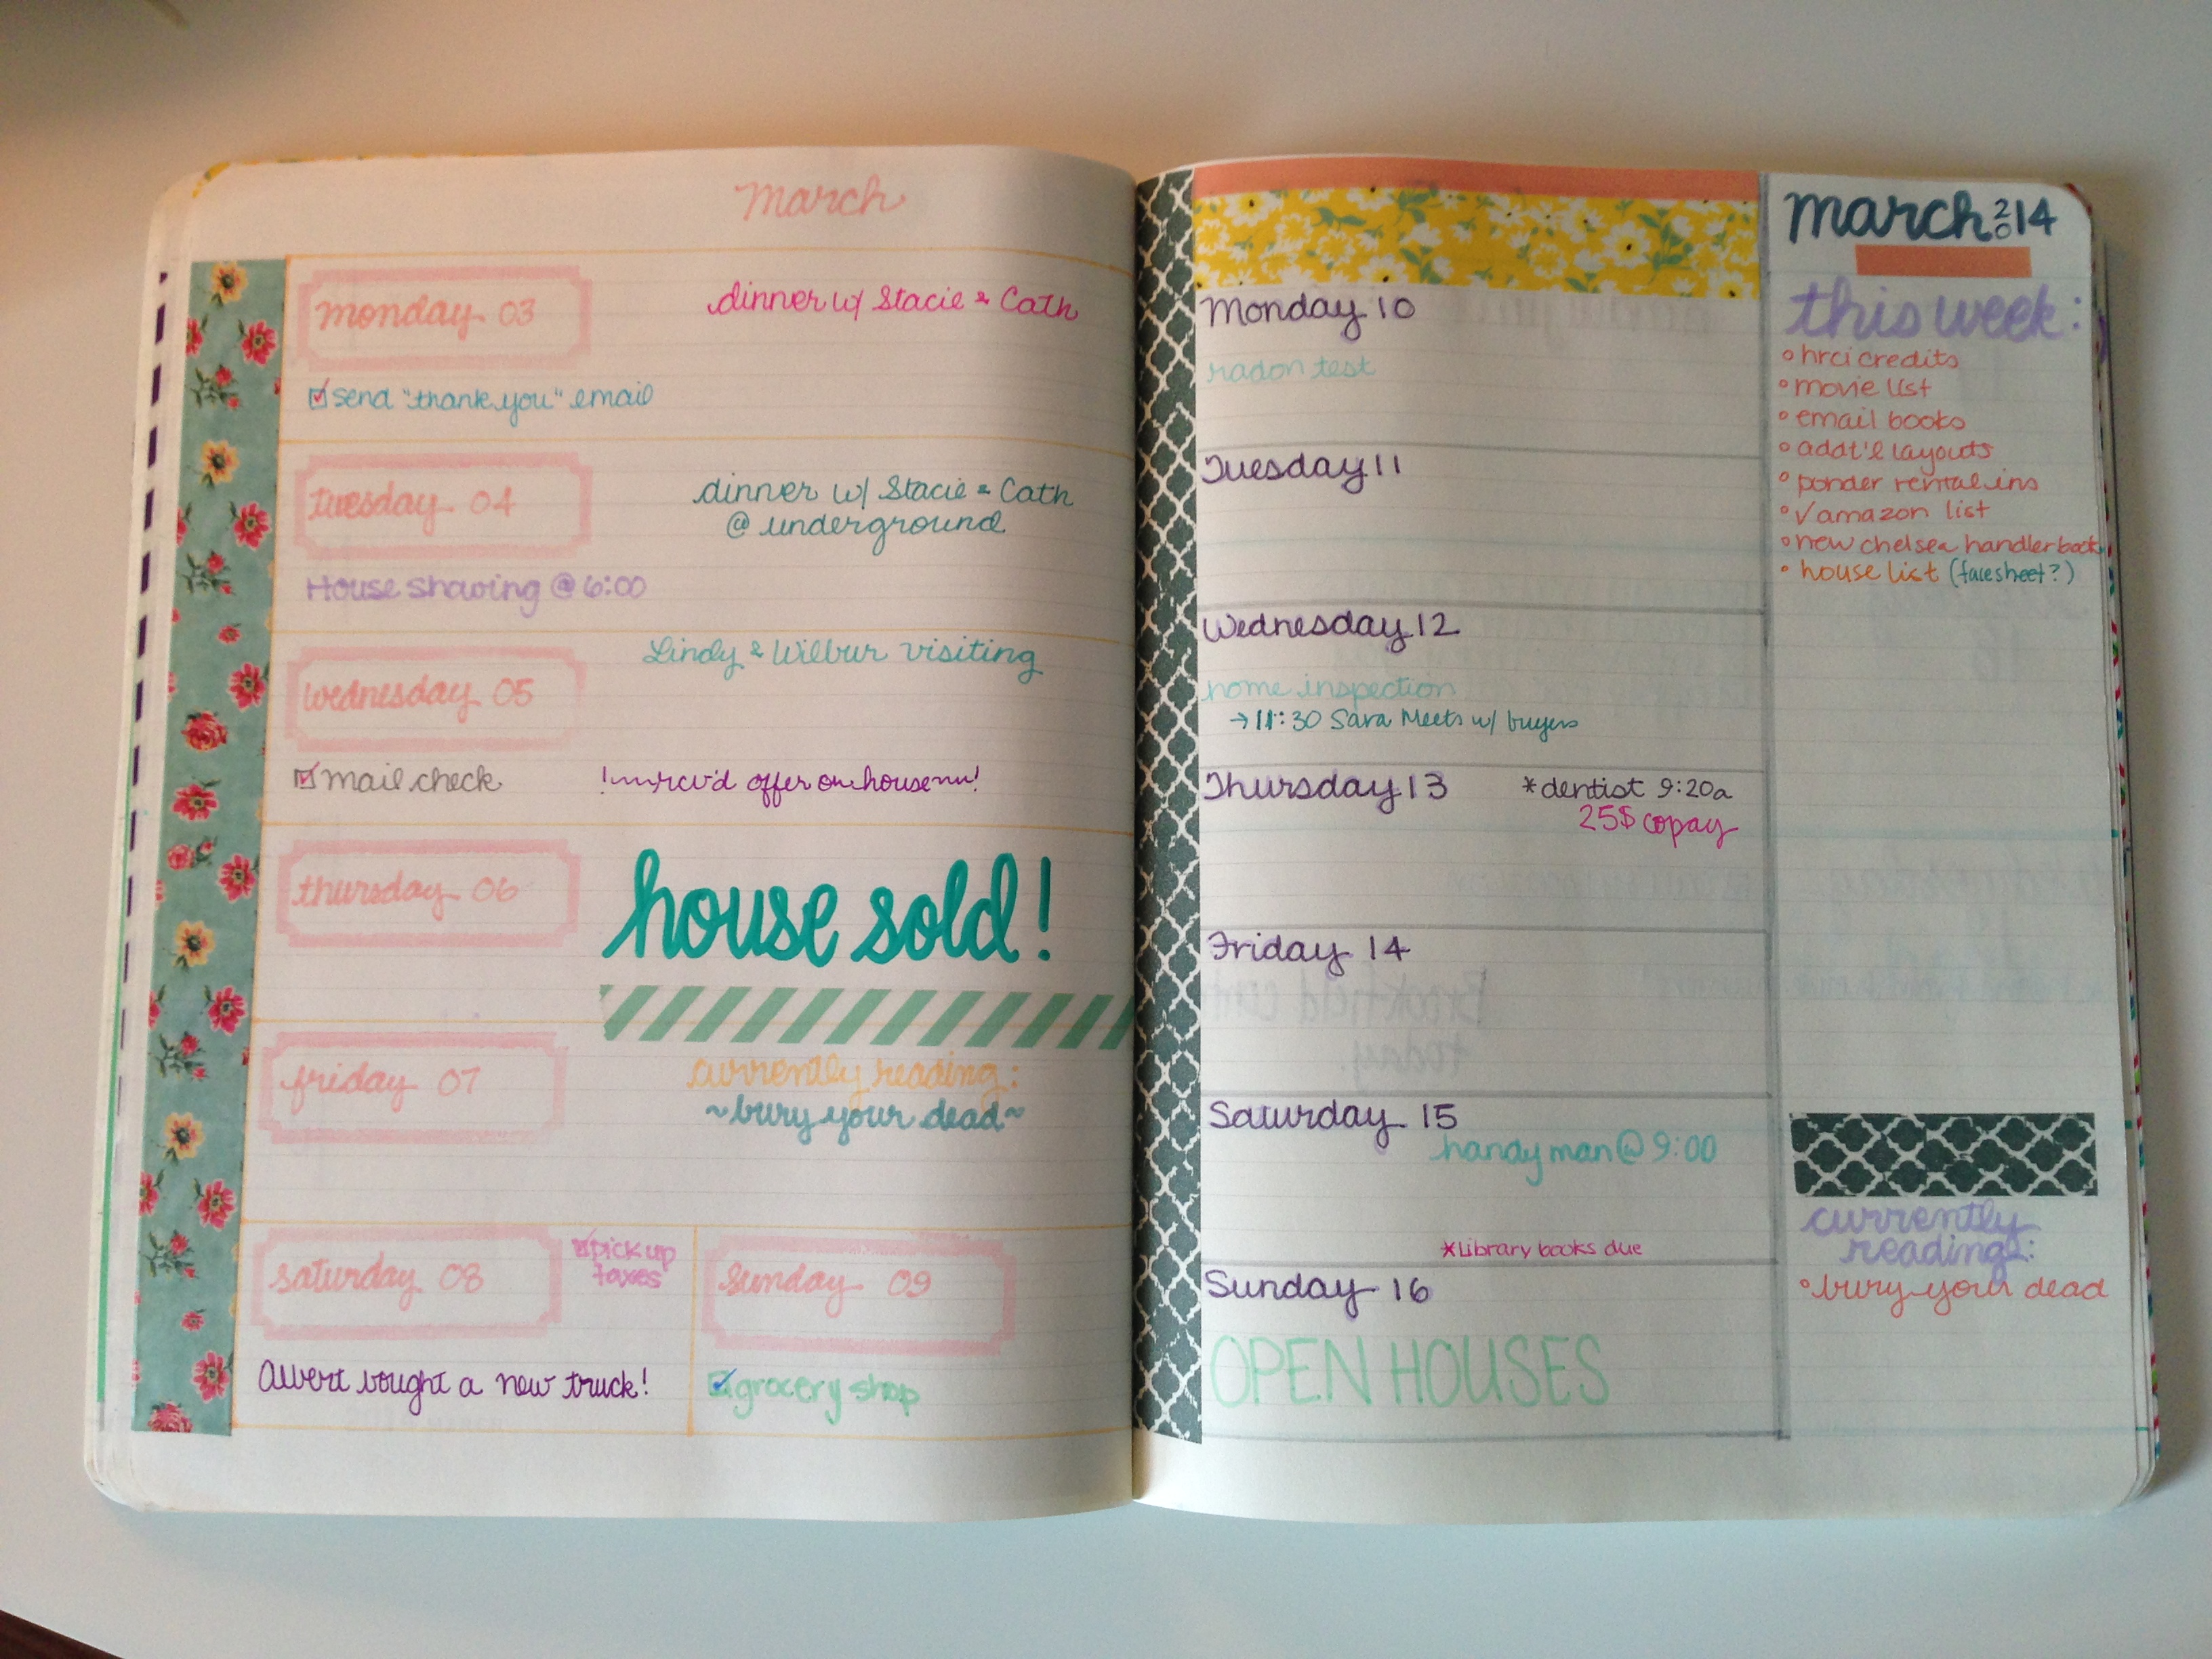 Review and Tour of Melinda's DIY Planner from an XL moleskine cahier